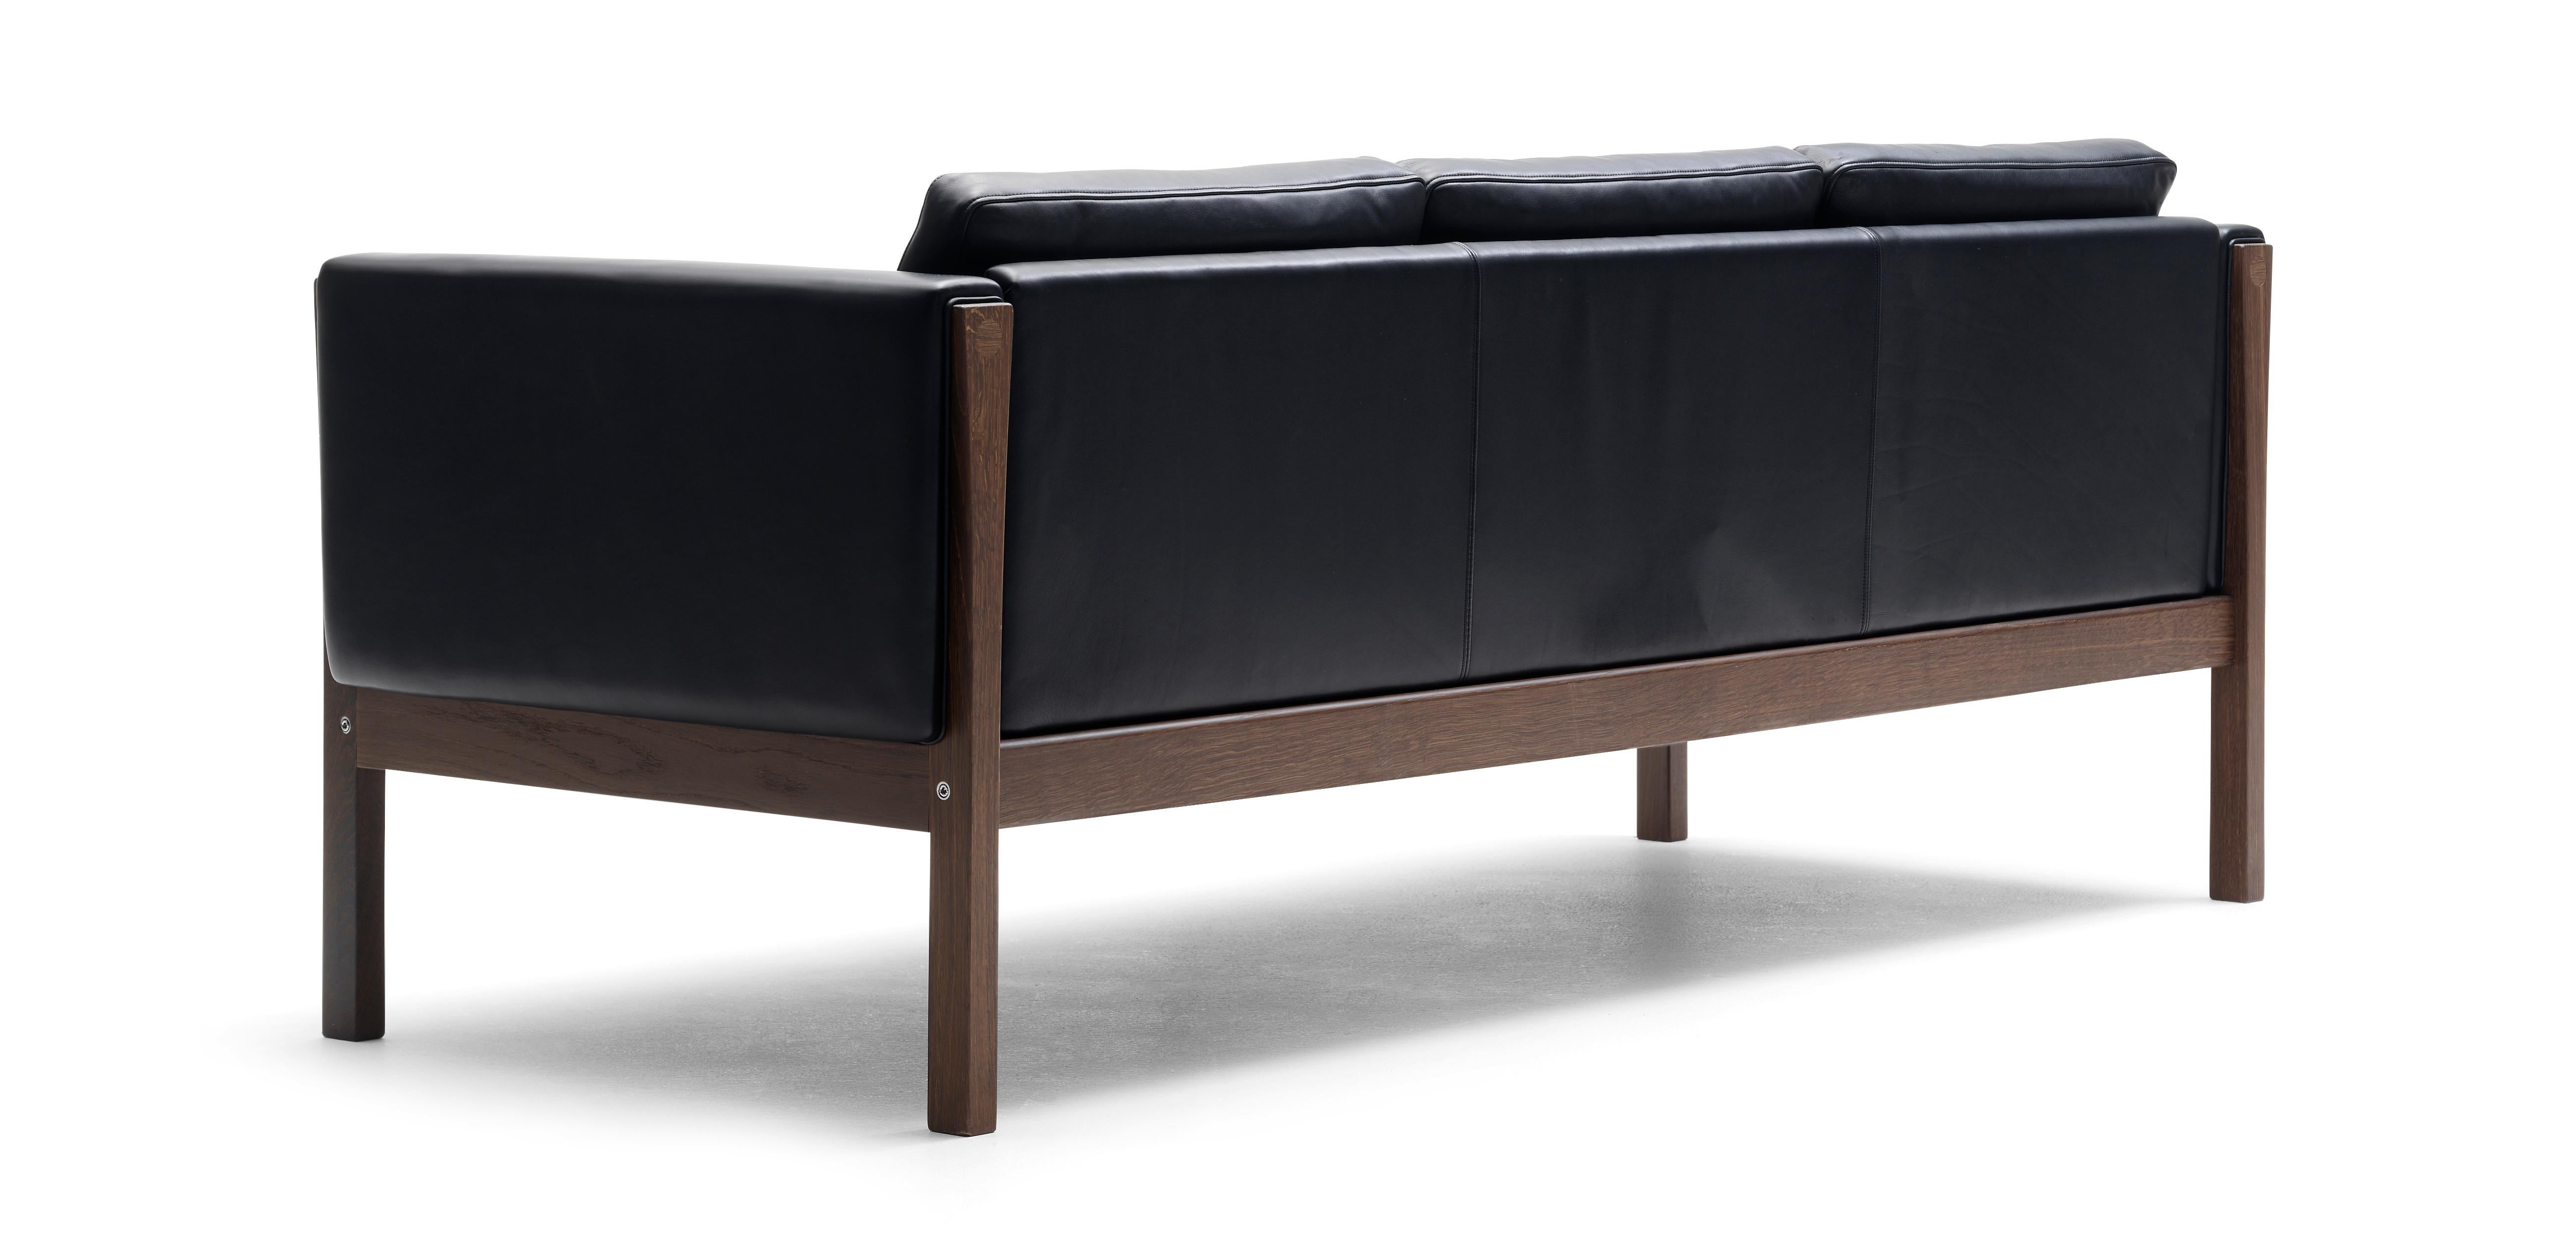 Black (Thor 301) CH163 Sofa in Walnut Oil Frame with Leather Upholstery by Hans J. Wegner 3